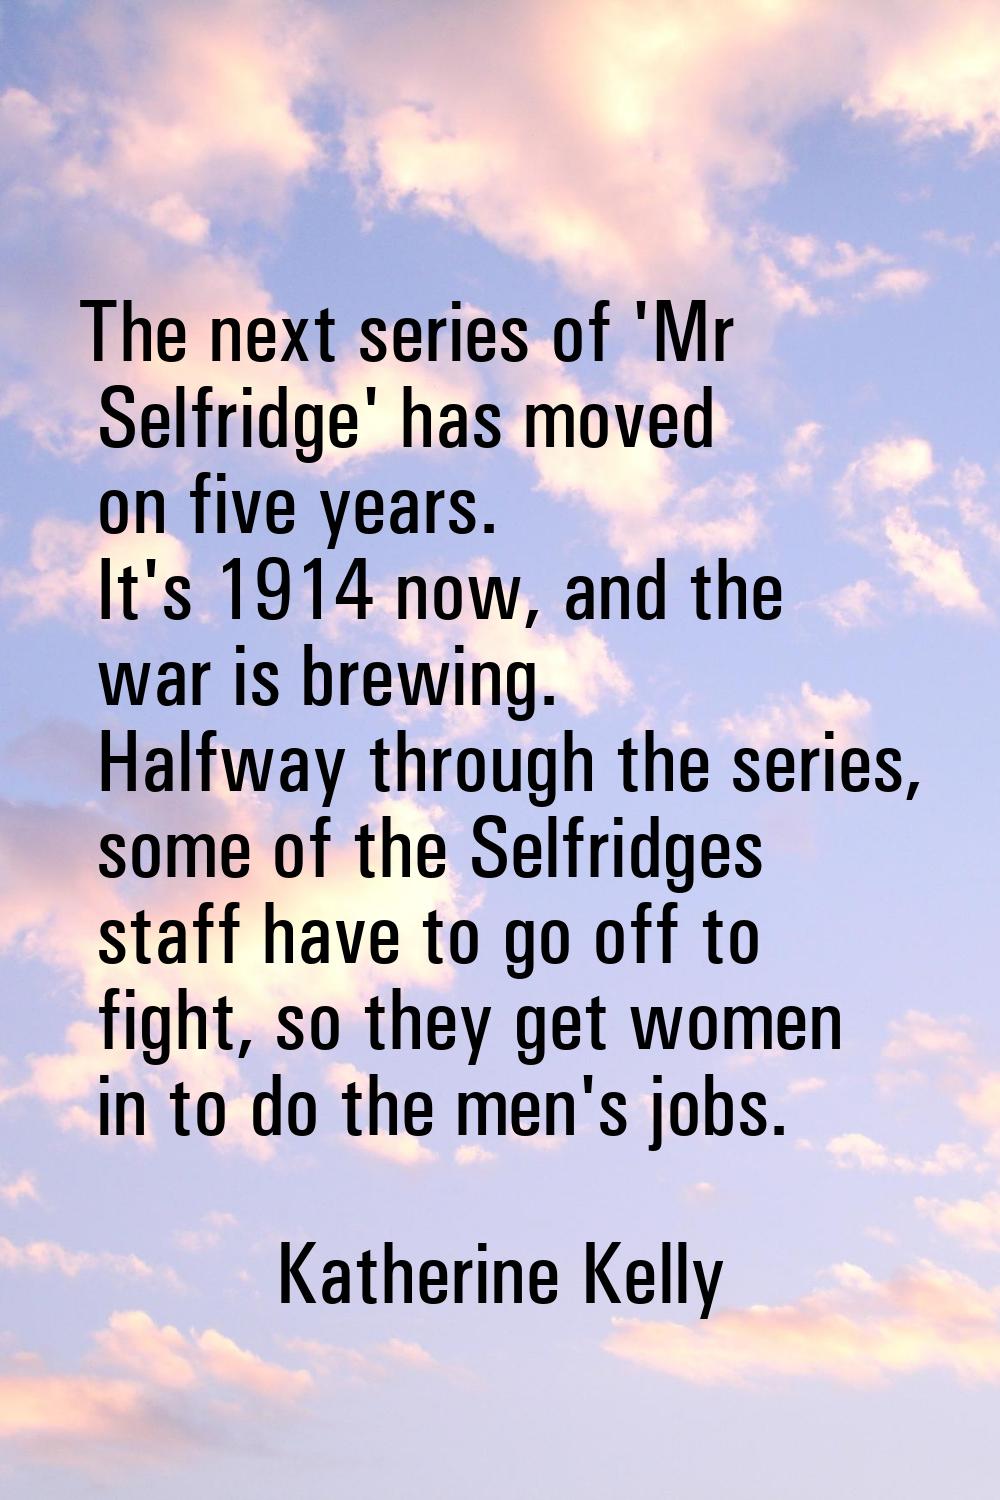 The next series of 'Mr Selfridge' has moved on five years. It's 1914 now, and the war is brewing. H